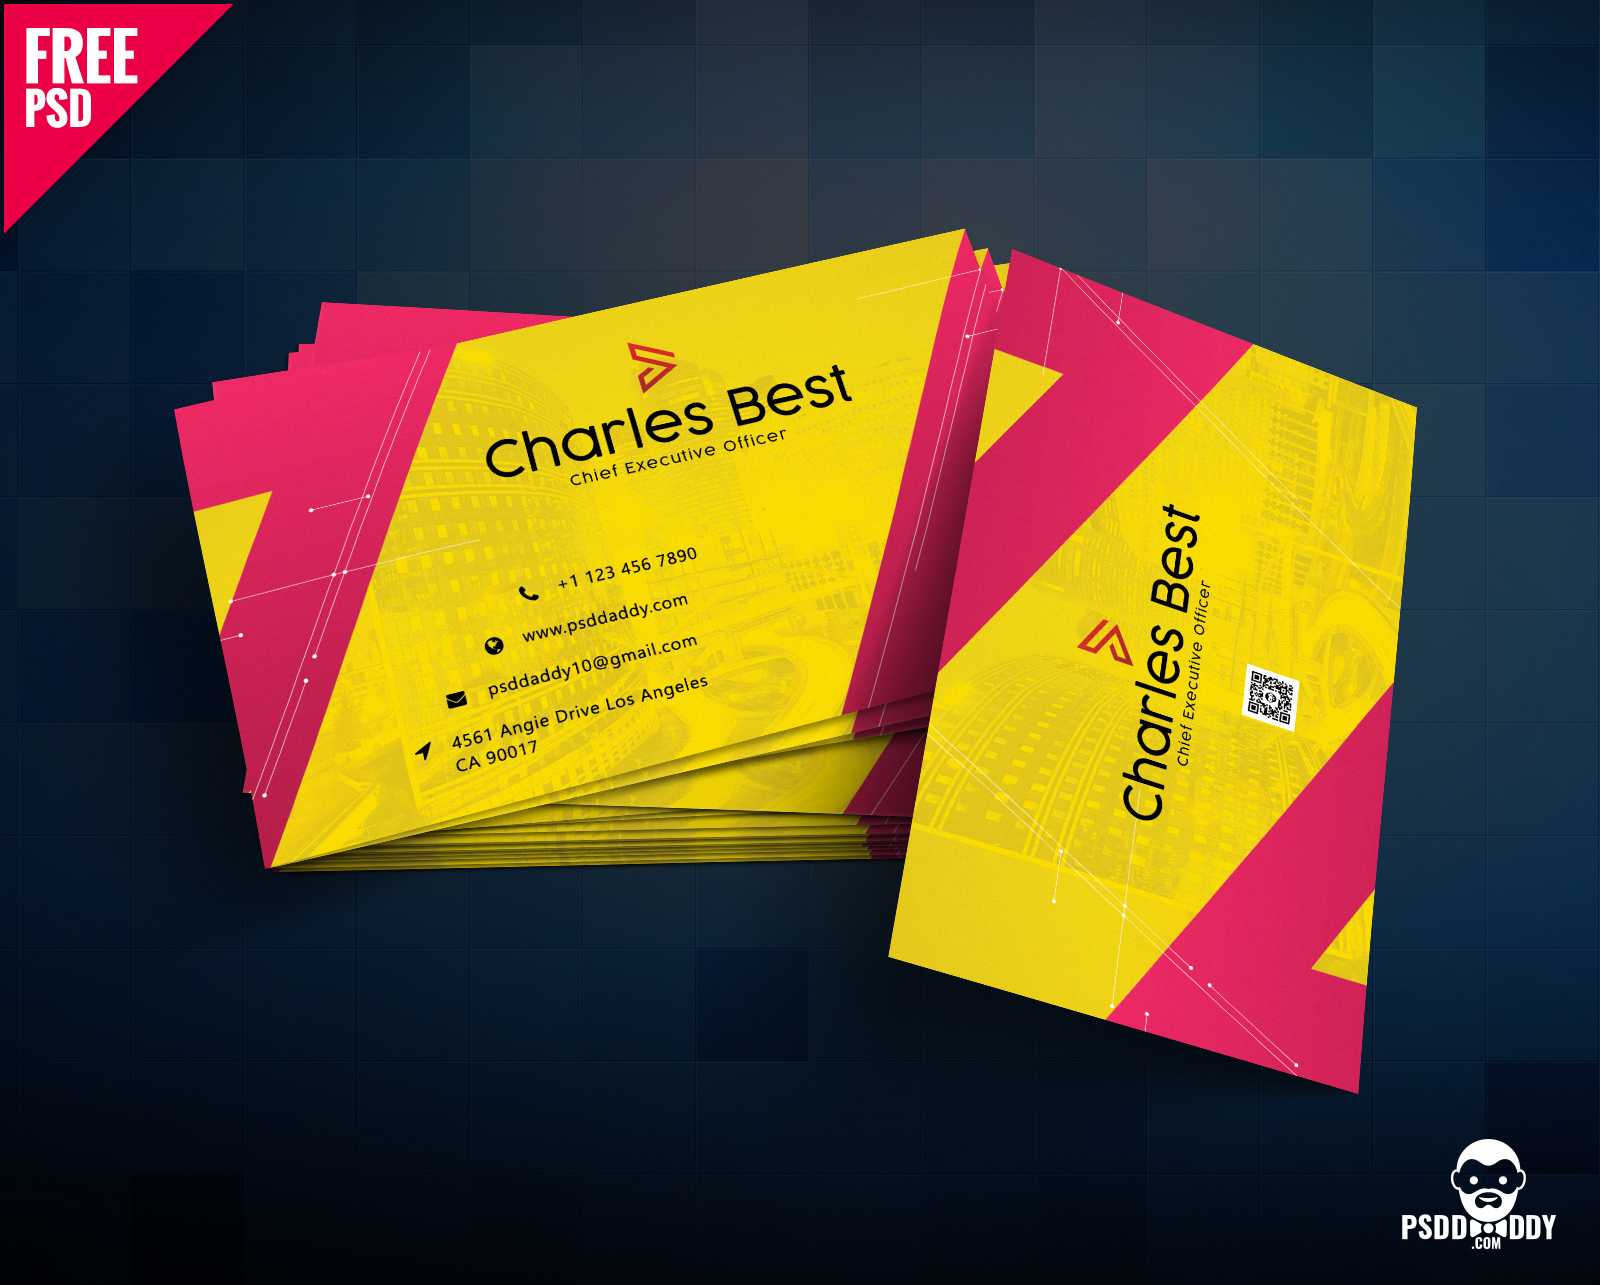 Download] Creative Business Card Free Psd | Psddaddy Throughout Name Card Template Psd Free Download